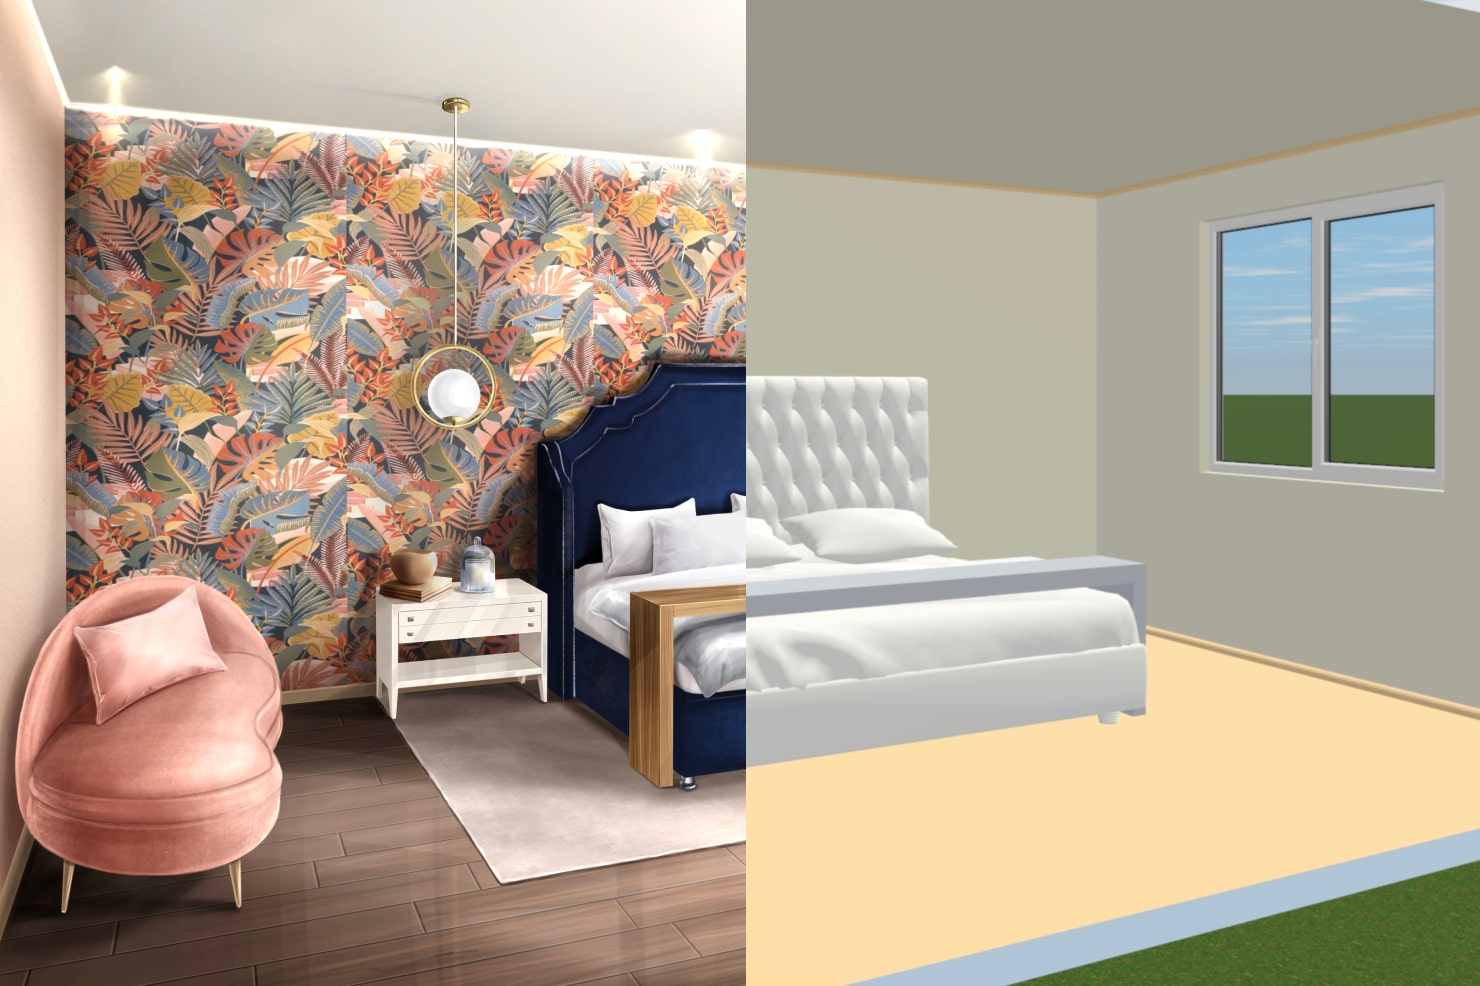 Answered The 10 Best Interior Design Apps for Smartphones